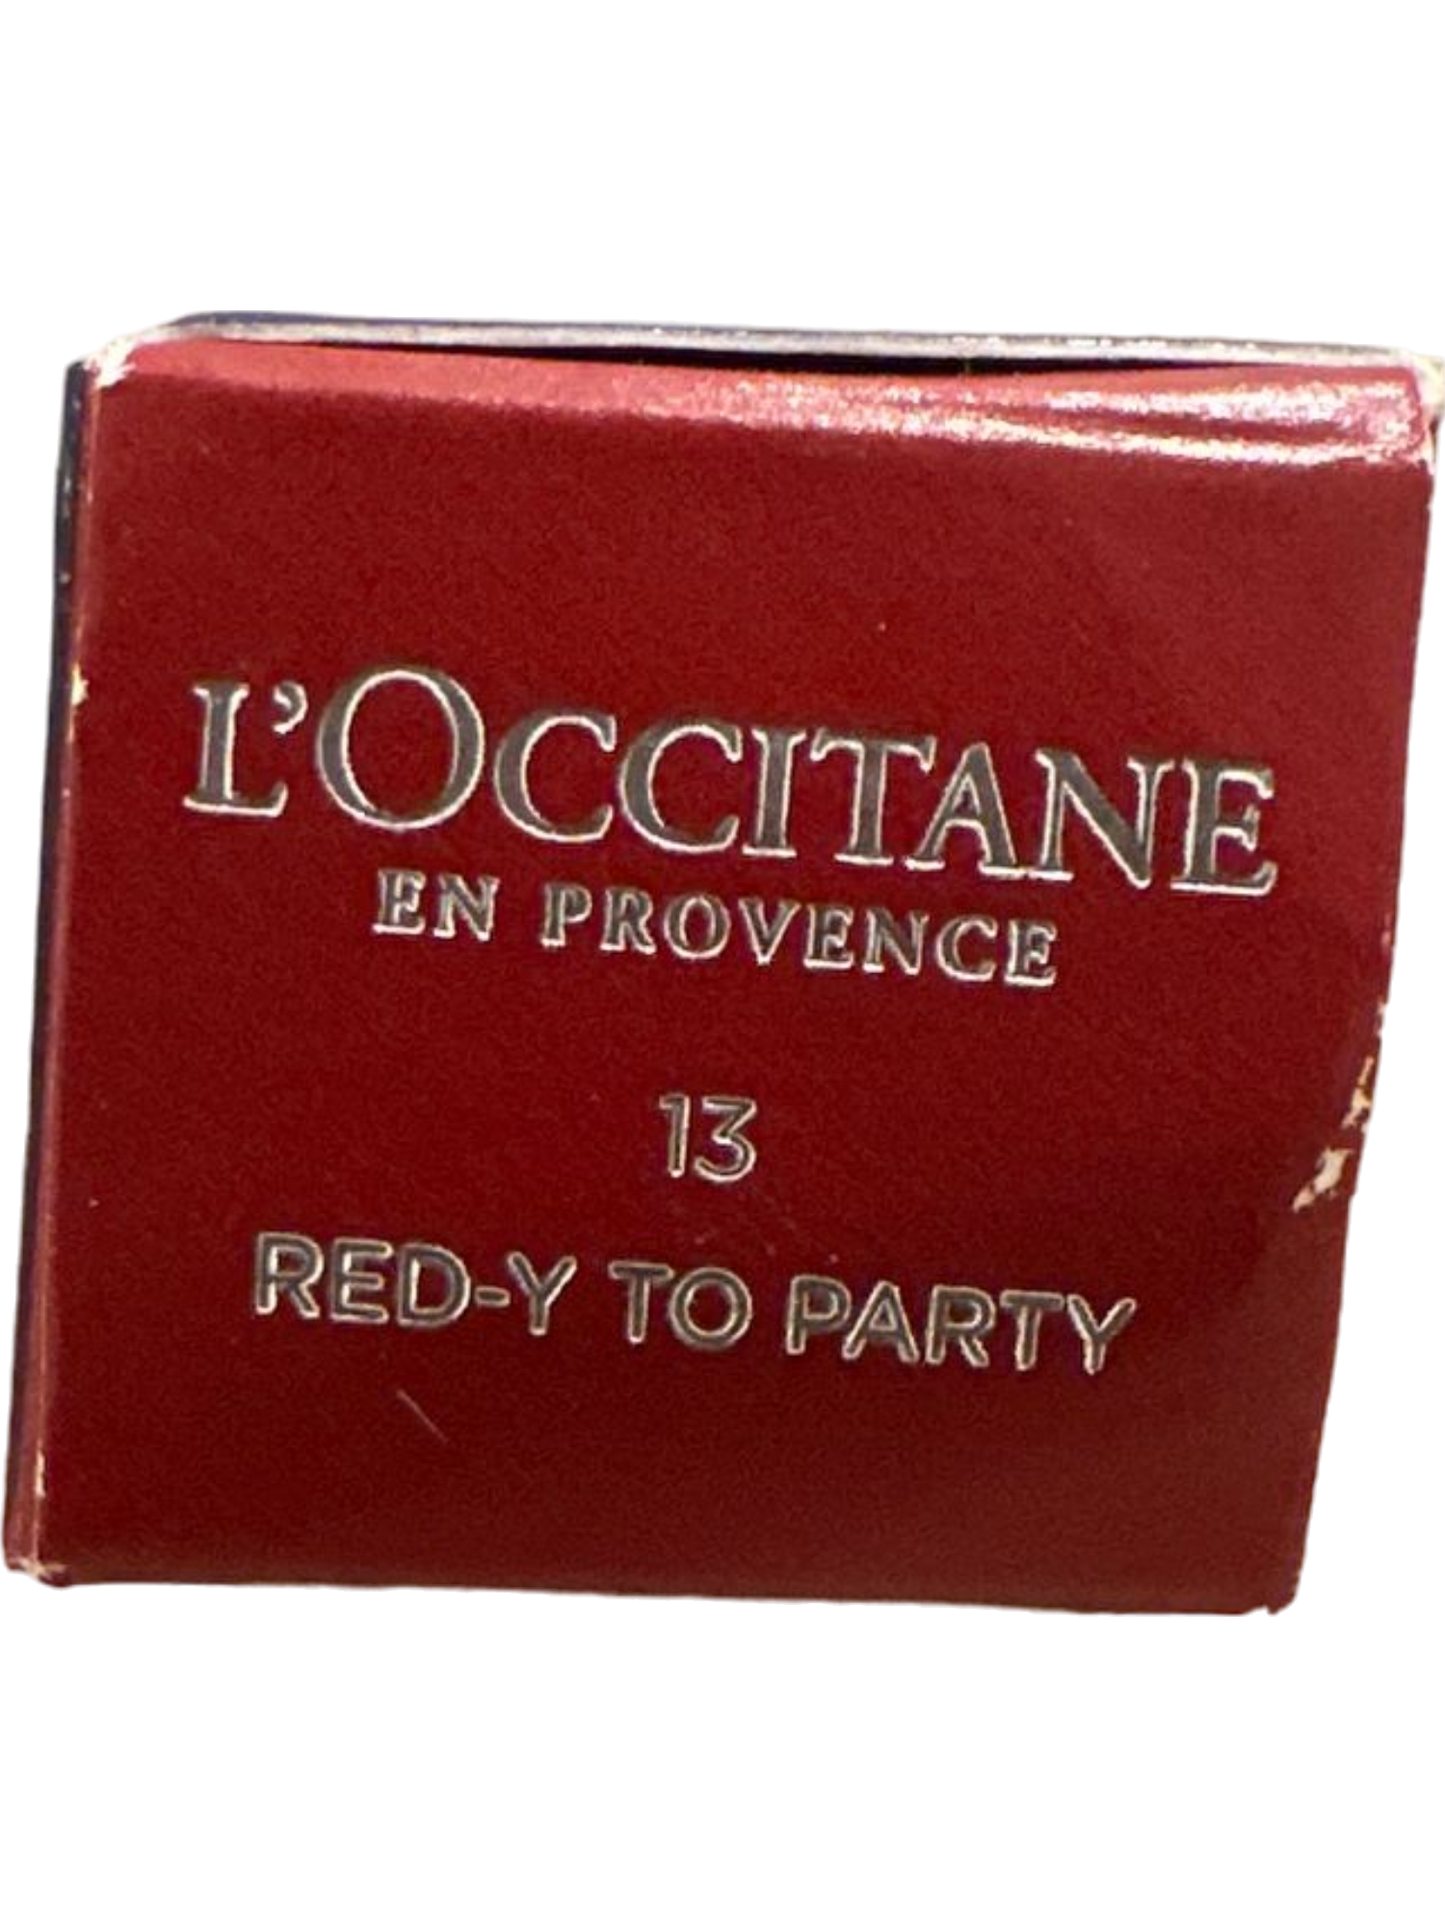 L'OCCITANE Red Intense Fruity Lipstick - Red-y to Party